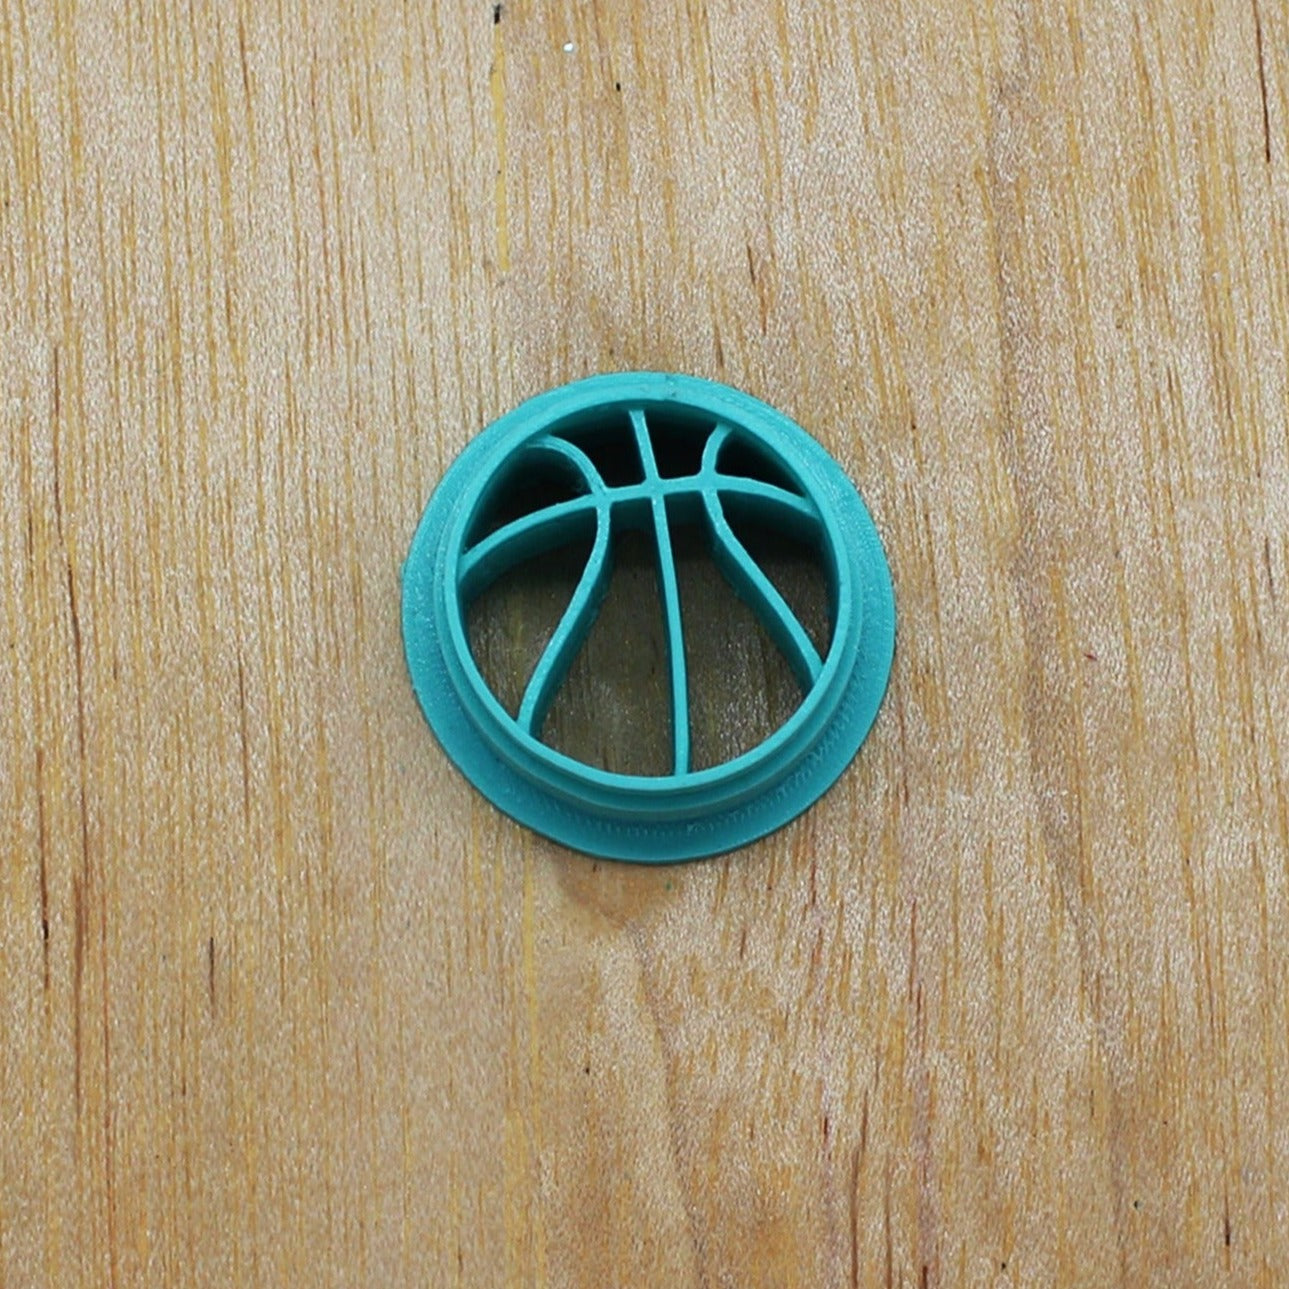 Basketball Cookie Cutter: Perfect for Cookies, Ceramics, Polymer Clay, Fondant, & More